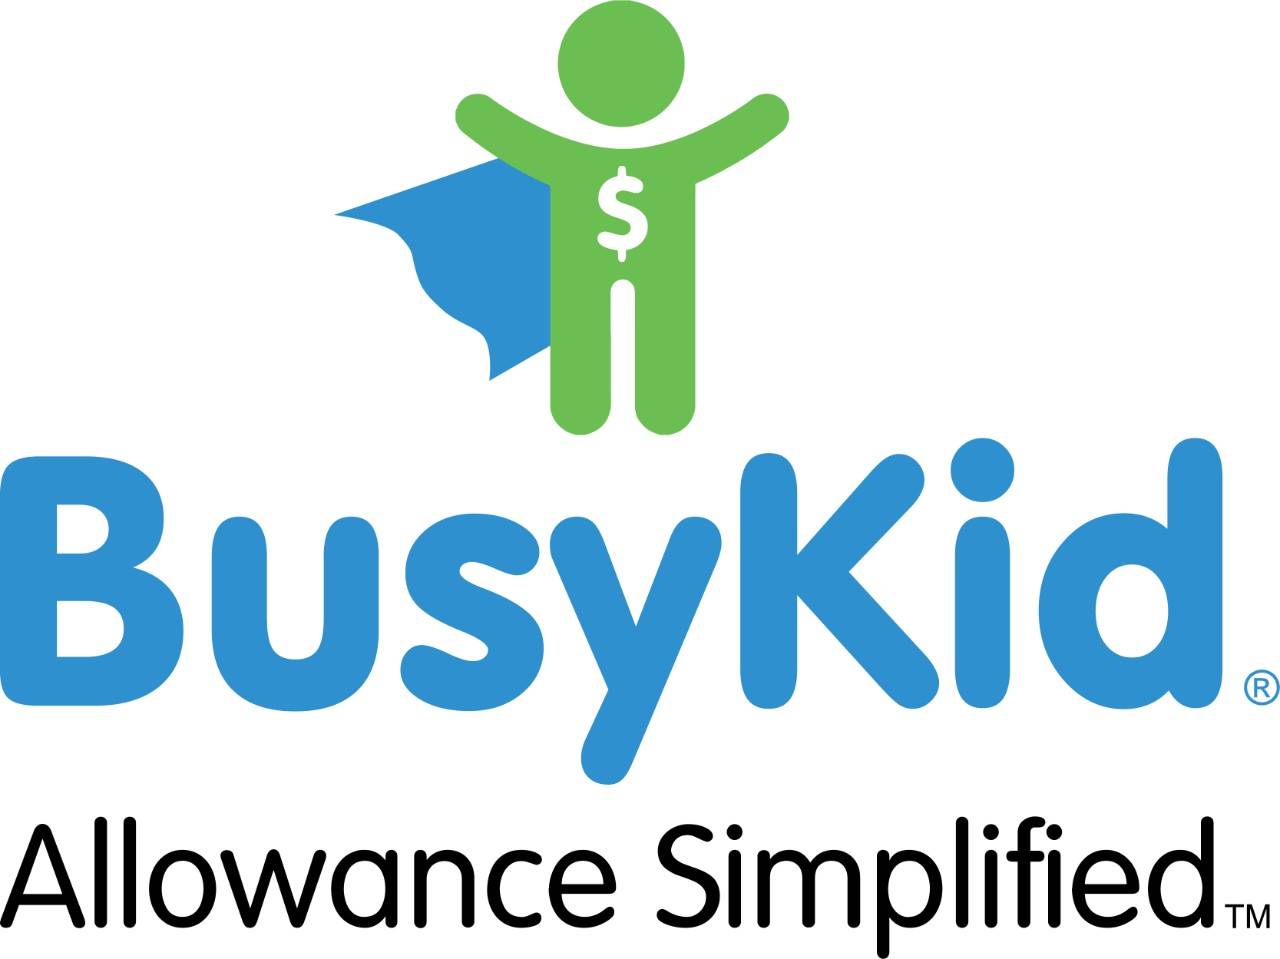 BusyKidsLogo_Stacked_R_216x384